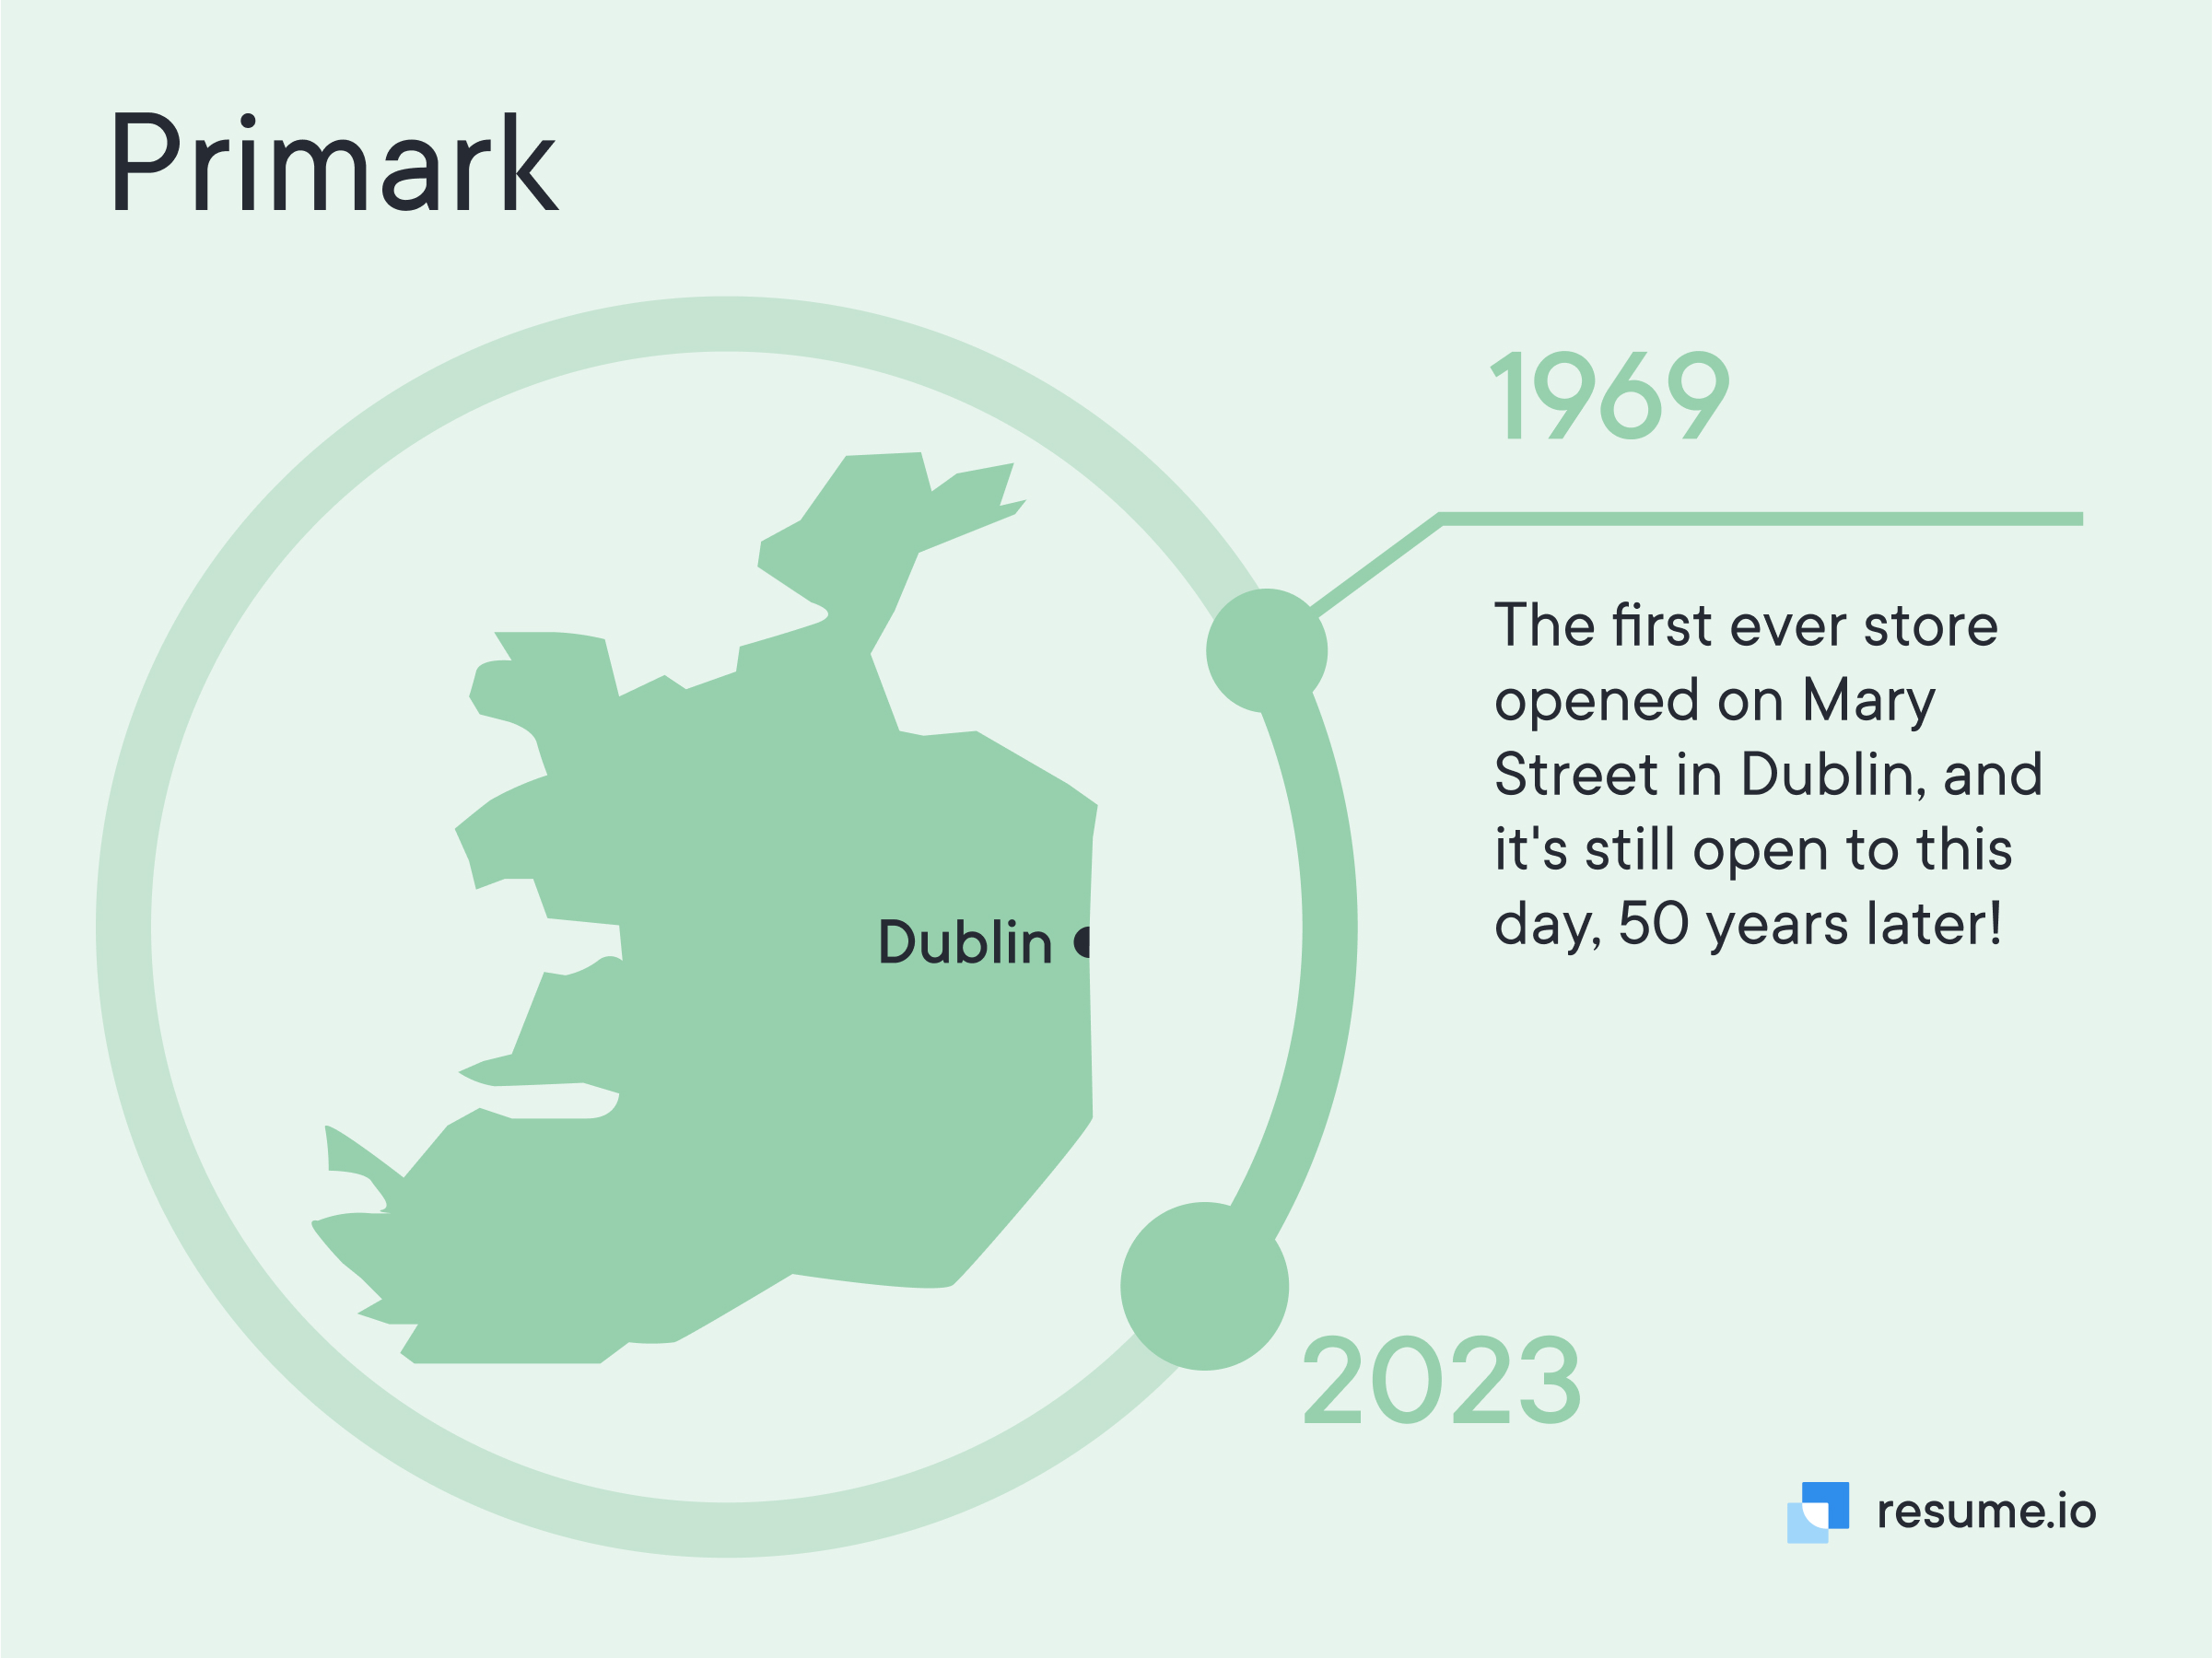 The first Primark opened in Dublin